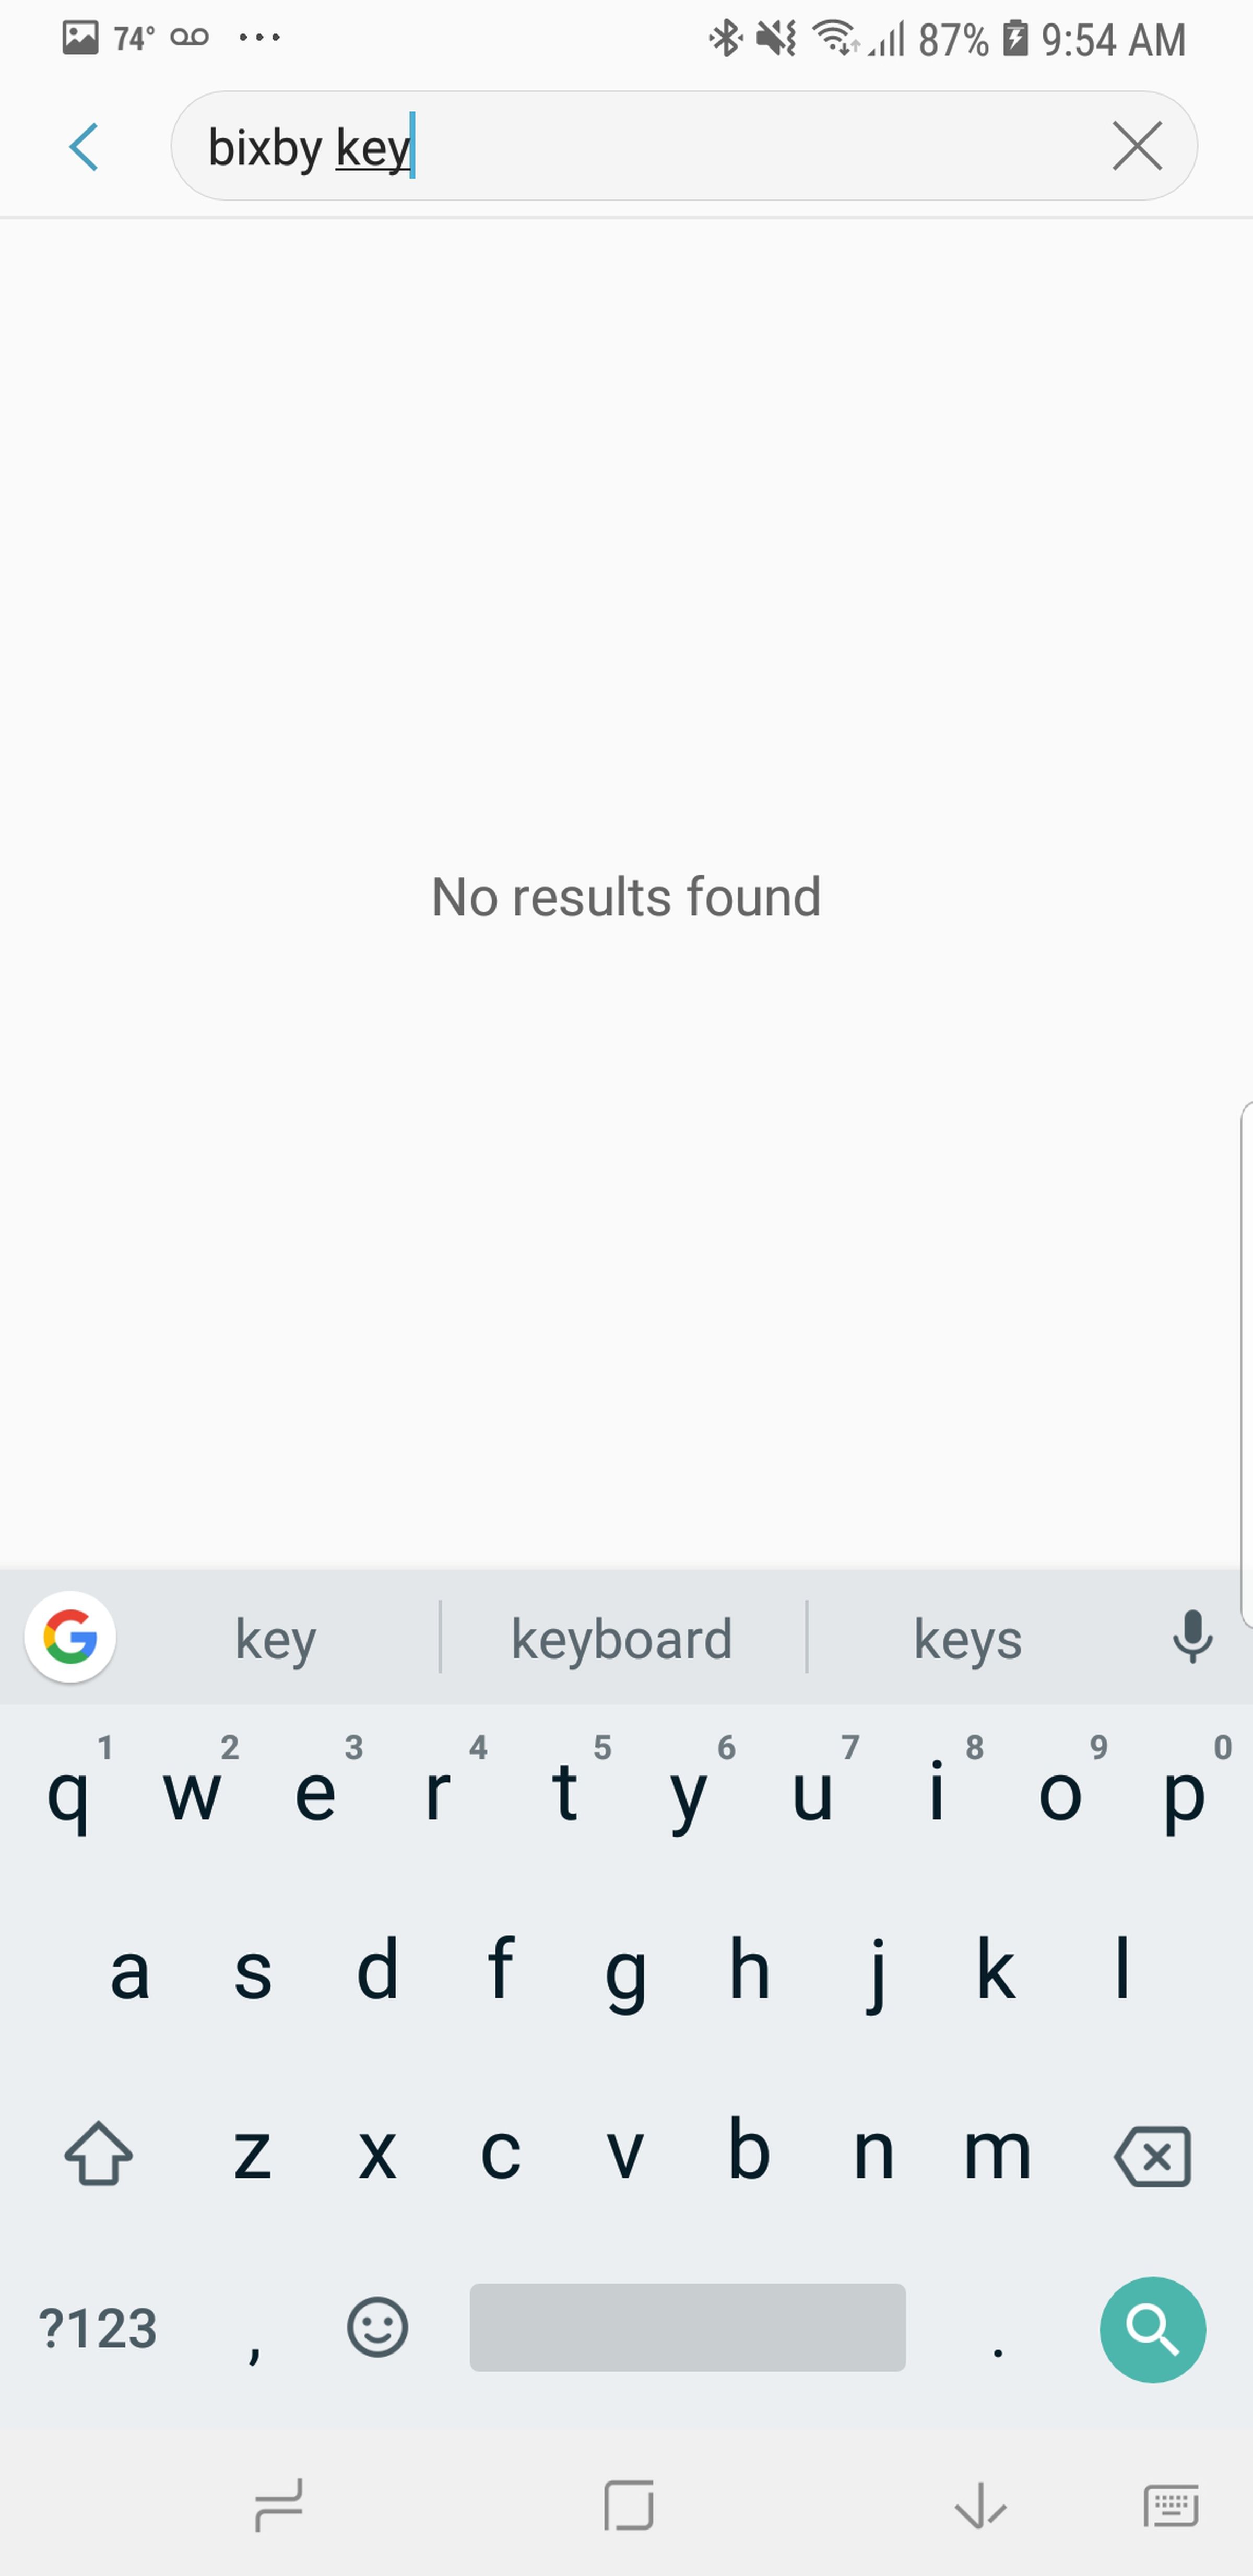 Searching for “Bixby Key” on the Galaxy Note 9.